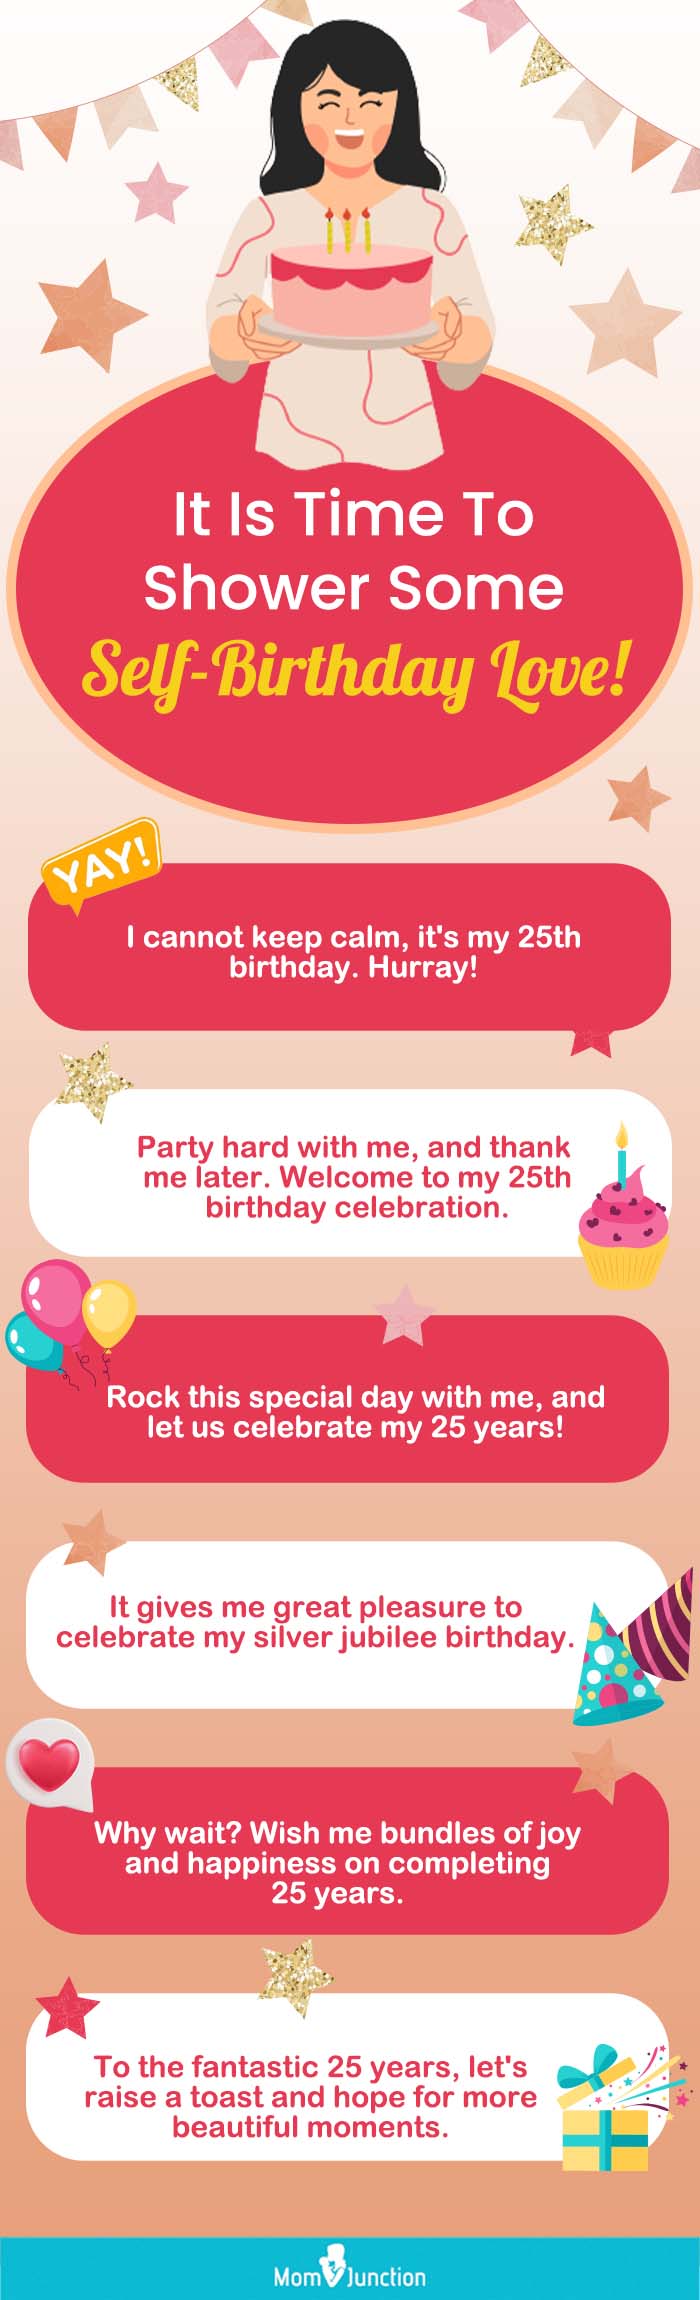 it is time to shower some self birthday love! (infographic)